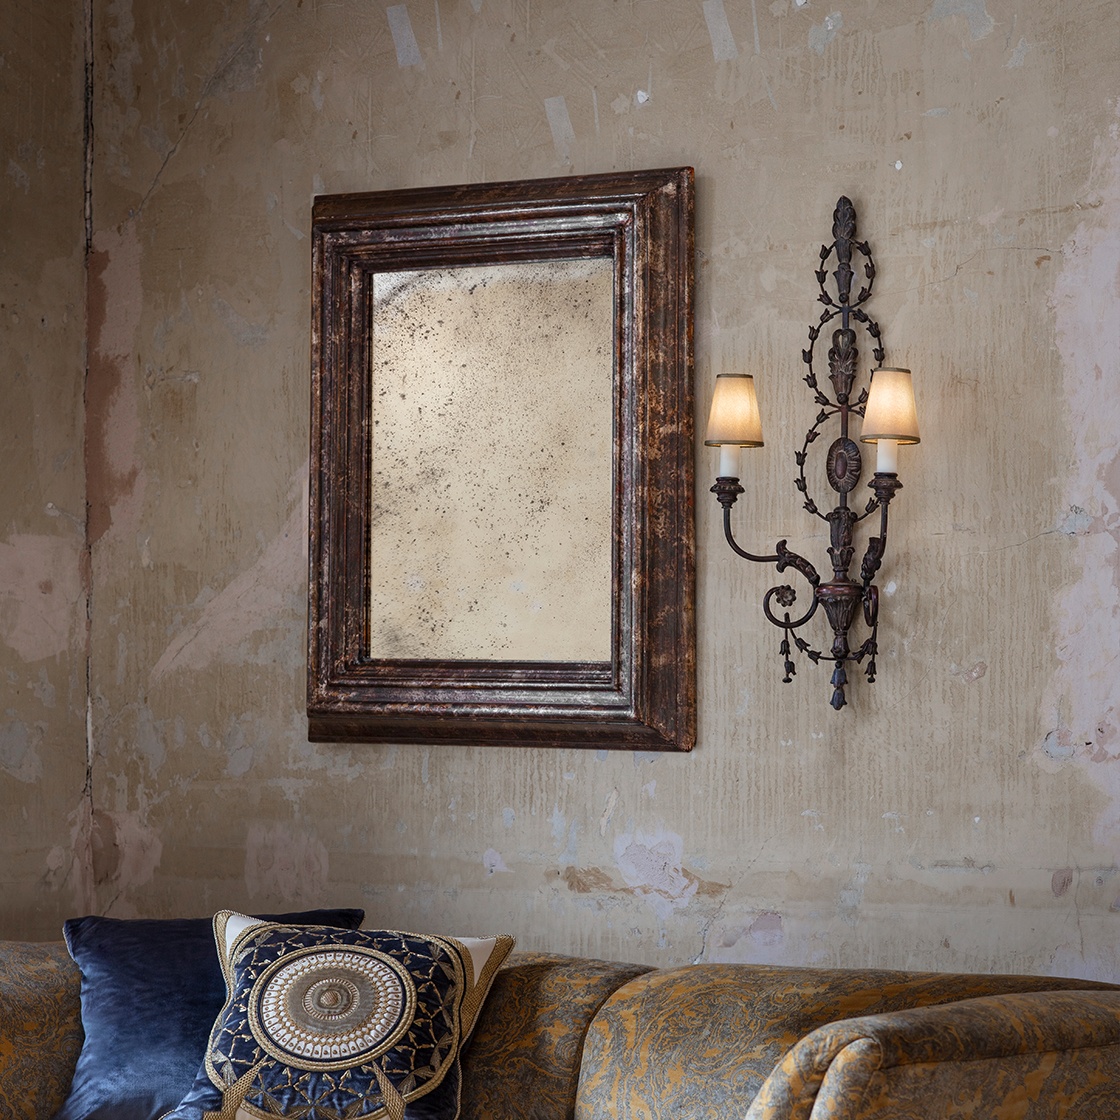 Florentine mirror in Light oxidised real silver with Pompadour sofa and Ettore cushion - Beaumont & Fletcher